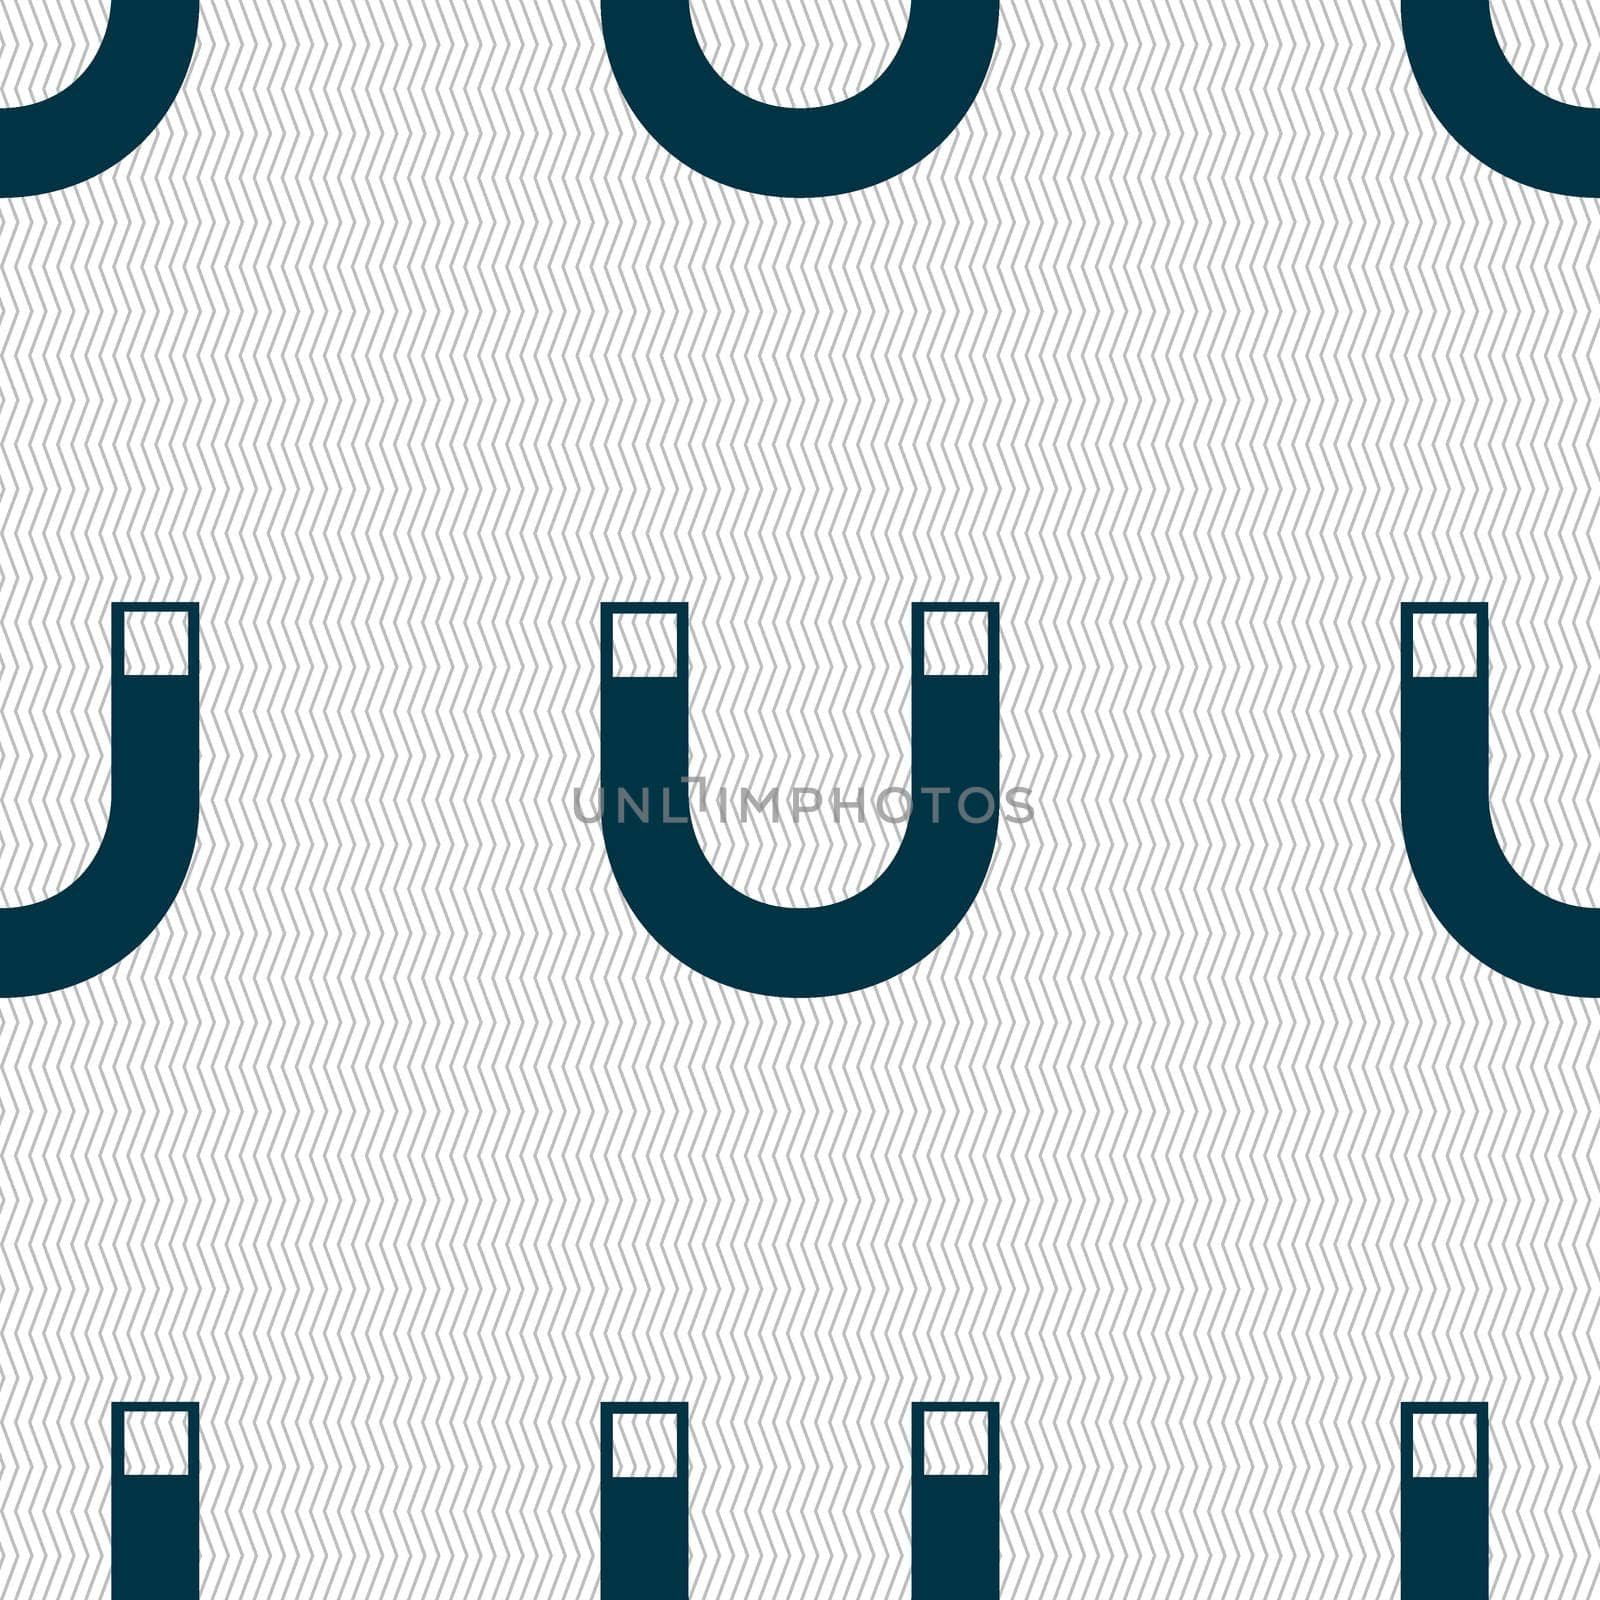 magnet sign icon. horseshoe it symbol. Repair sig. Seamless abstract background with geometric shapes.  by serhii_lohvyniuk